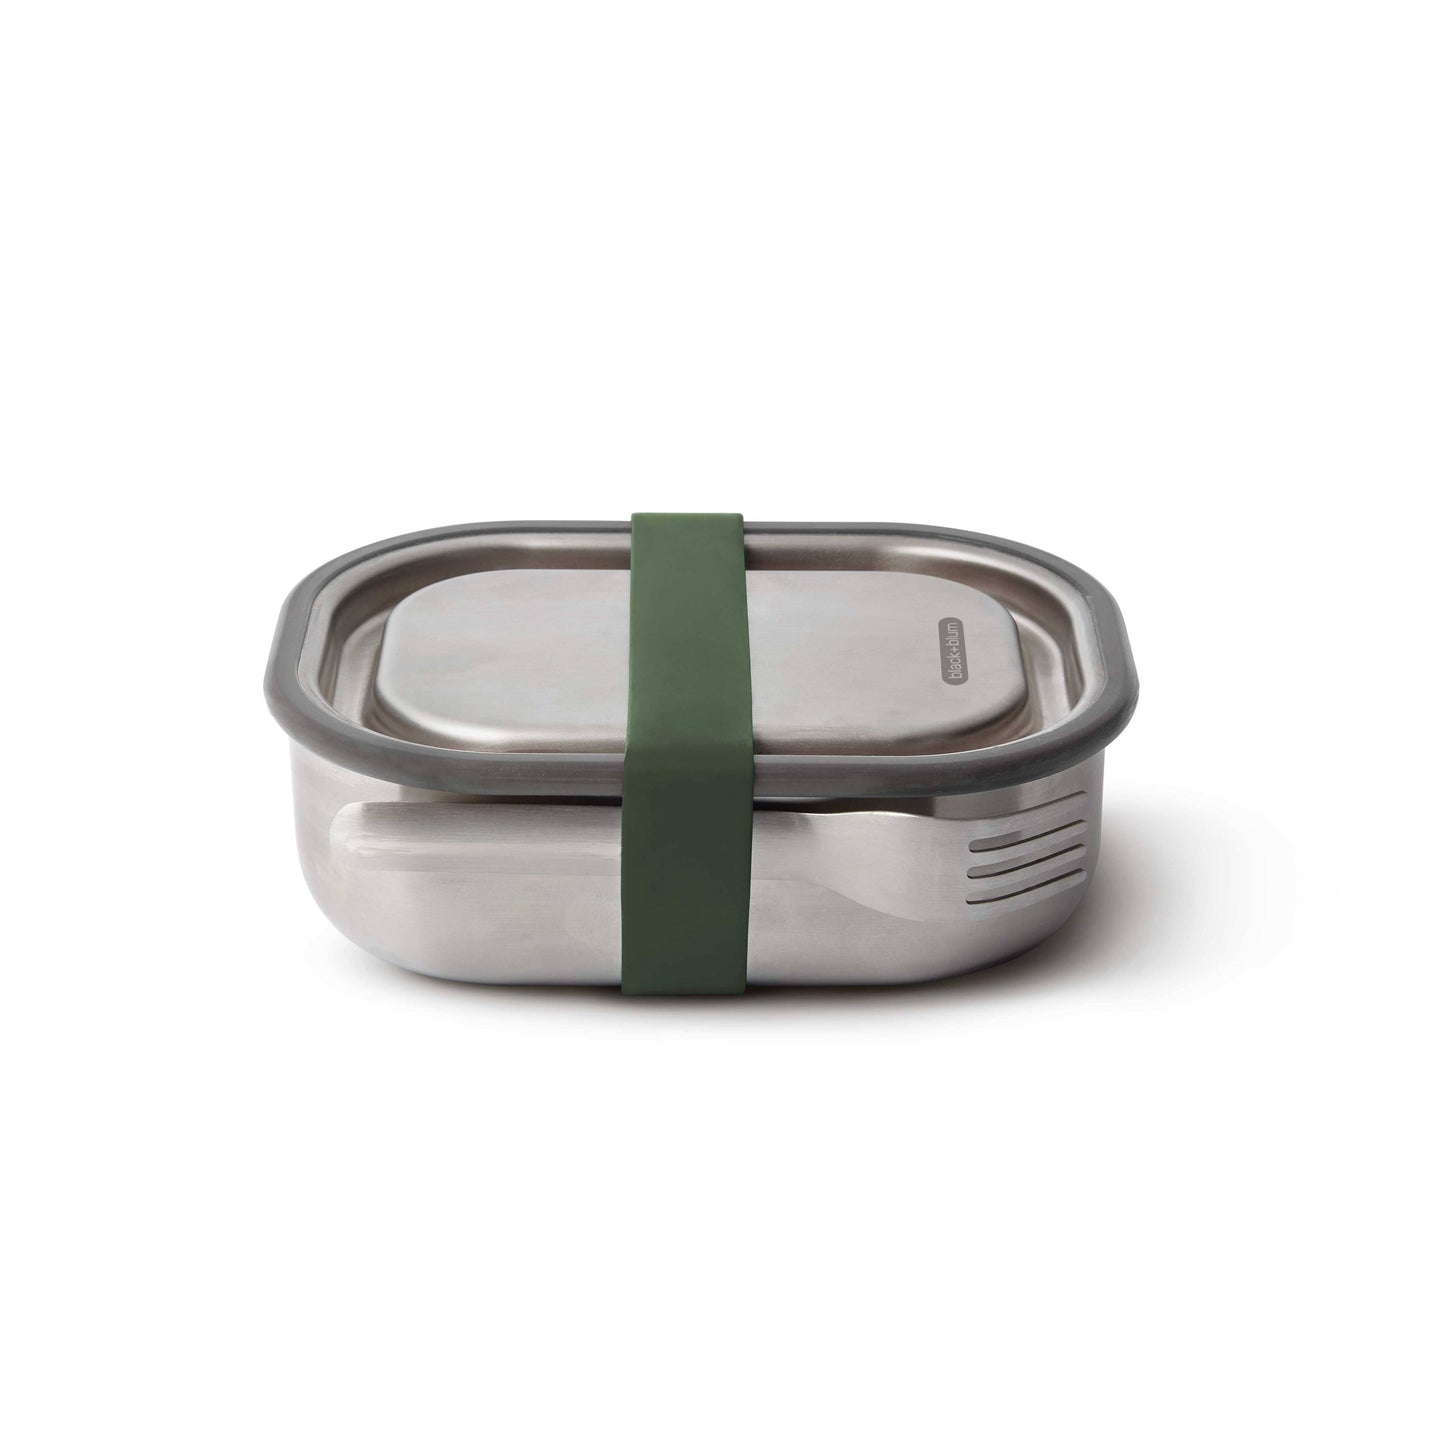 Black+Blum - Lunch Box - Leak Proof Stainless Steel Lunch Box: Olive